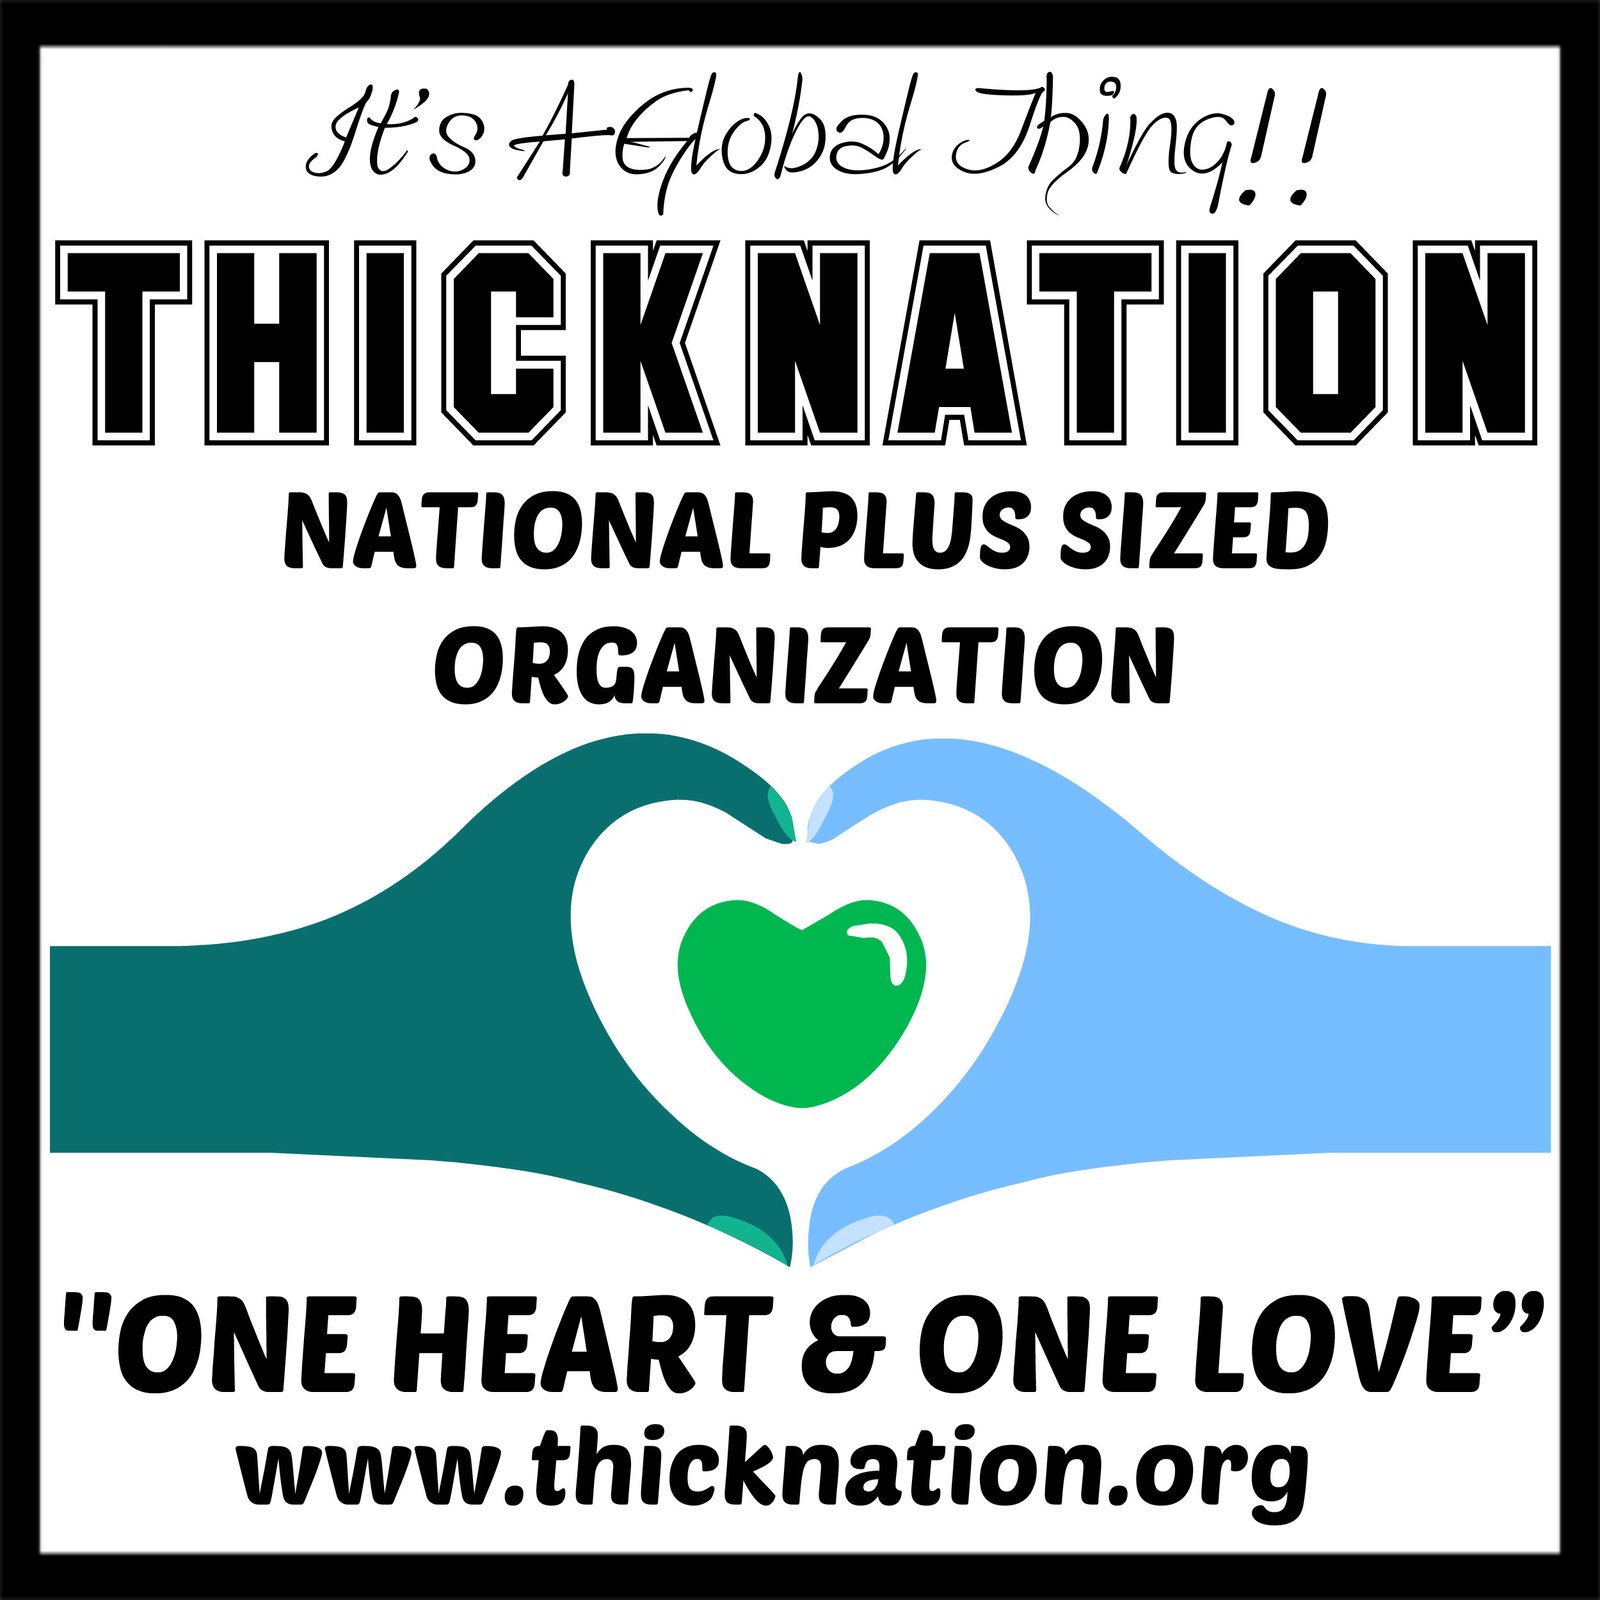 THE THICKNATION